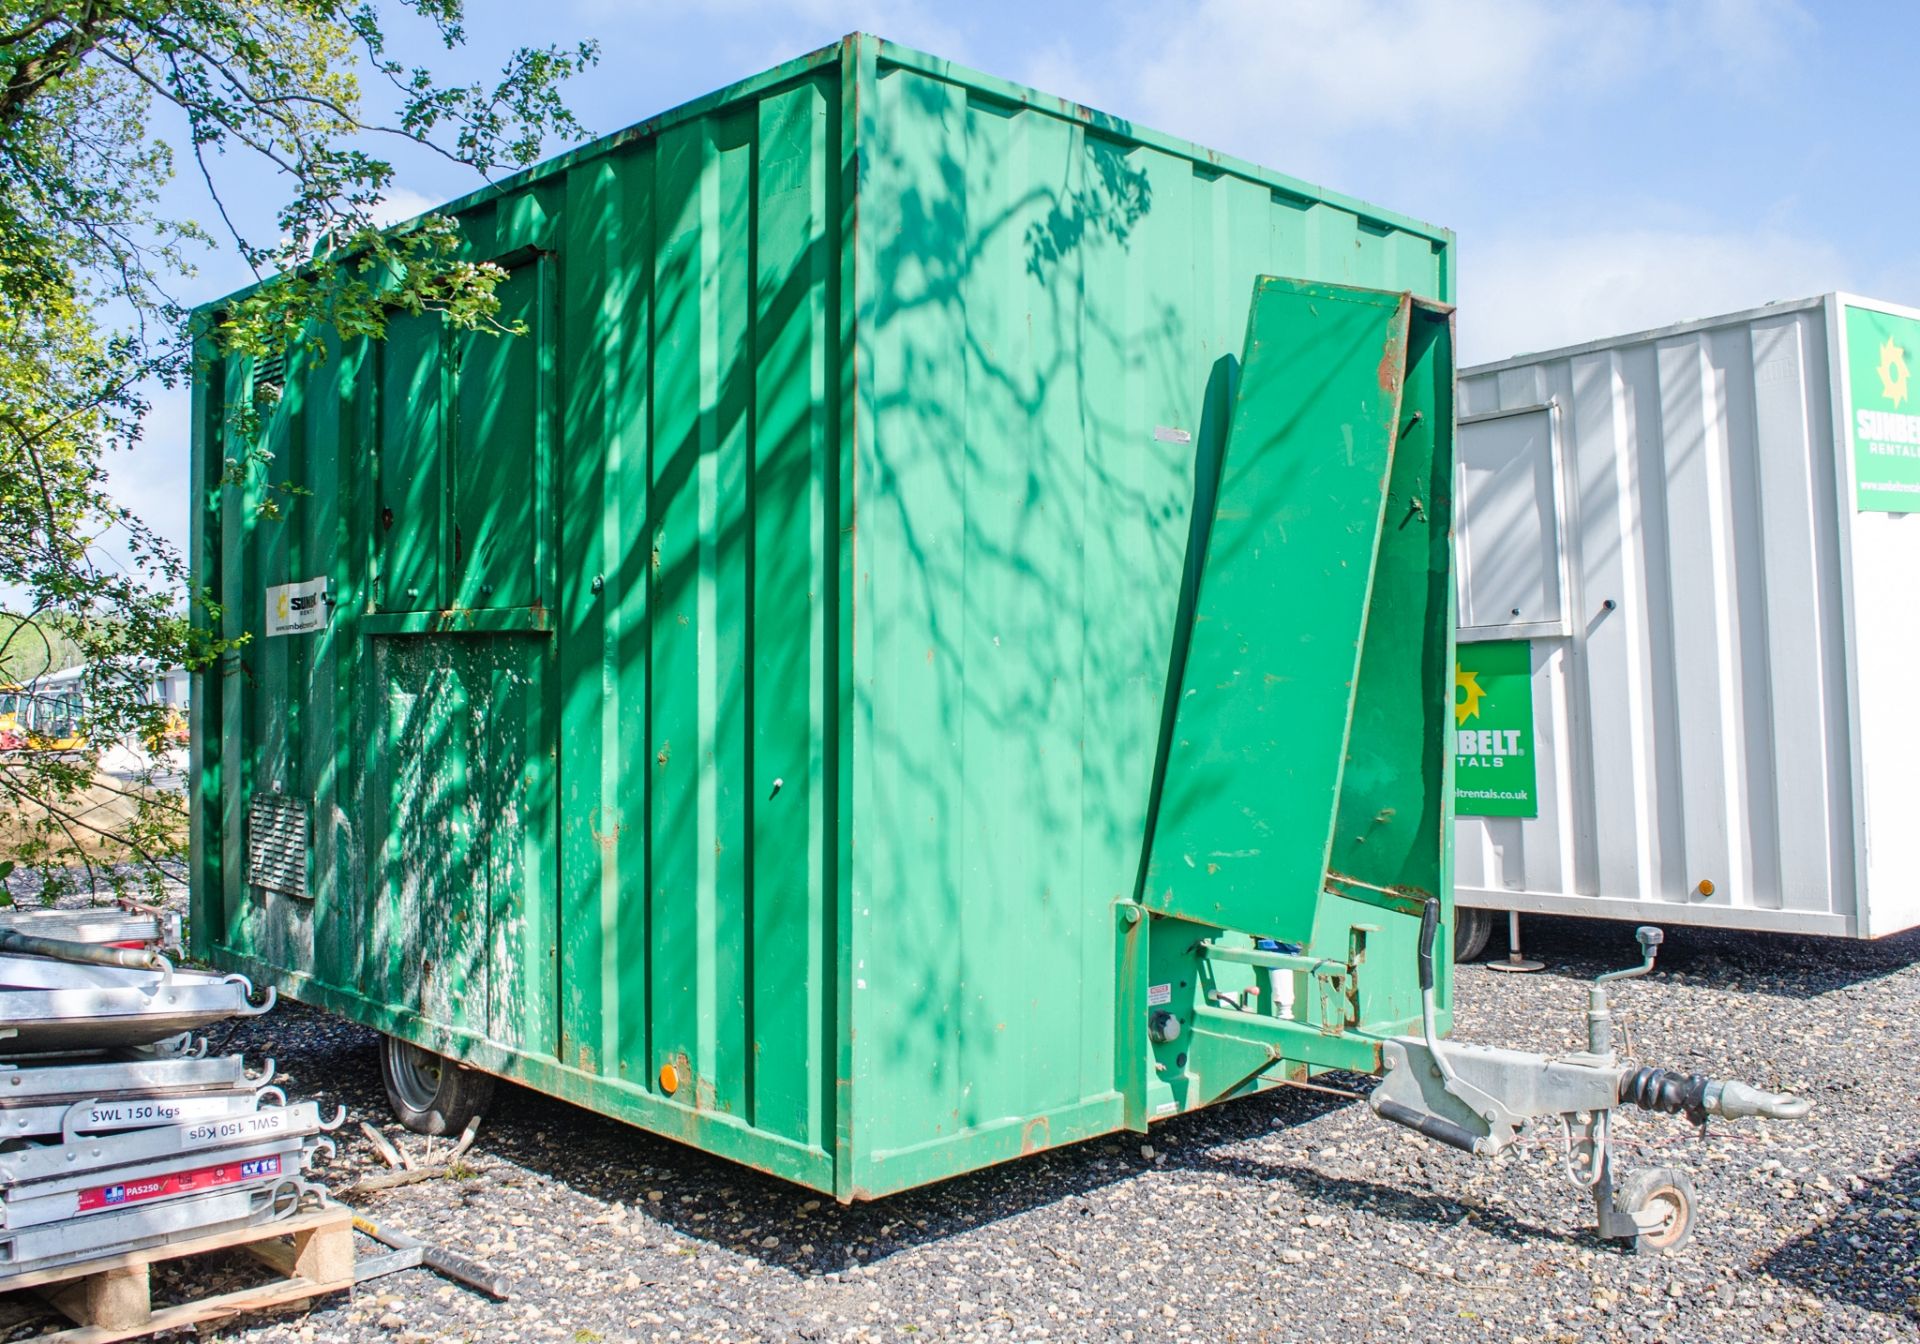 Groundhog 12 ft x 8 ft mobile welfare unit Comprising of: canteen area, toilet & generator room - Image 2 of 11